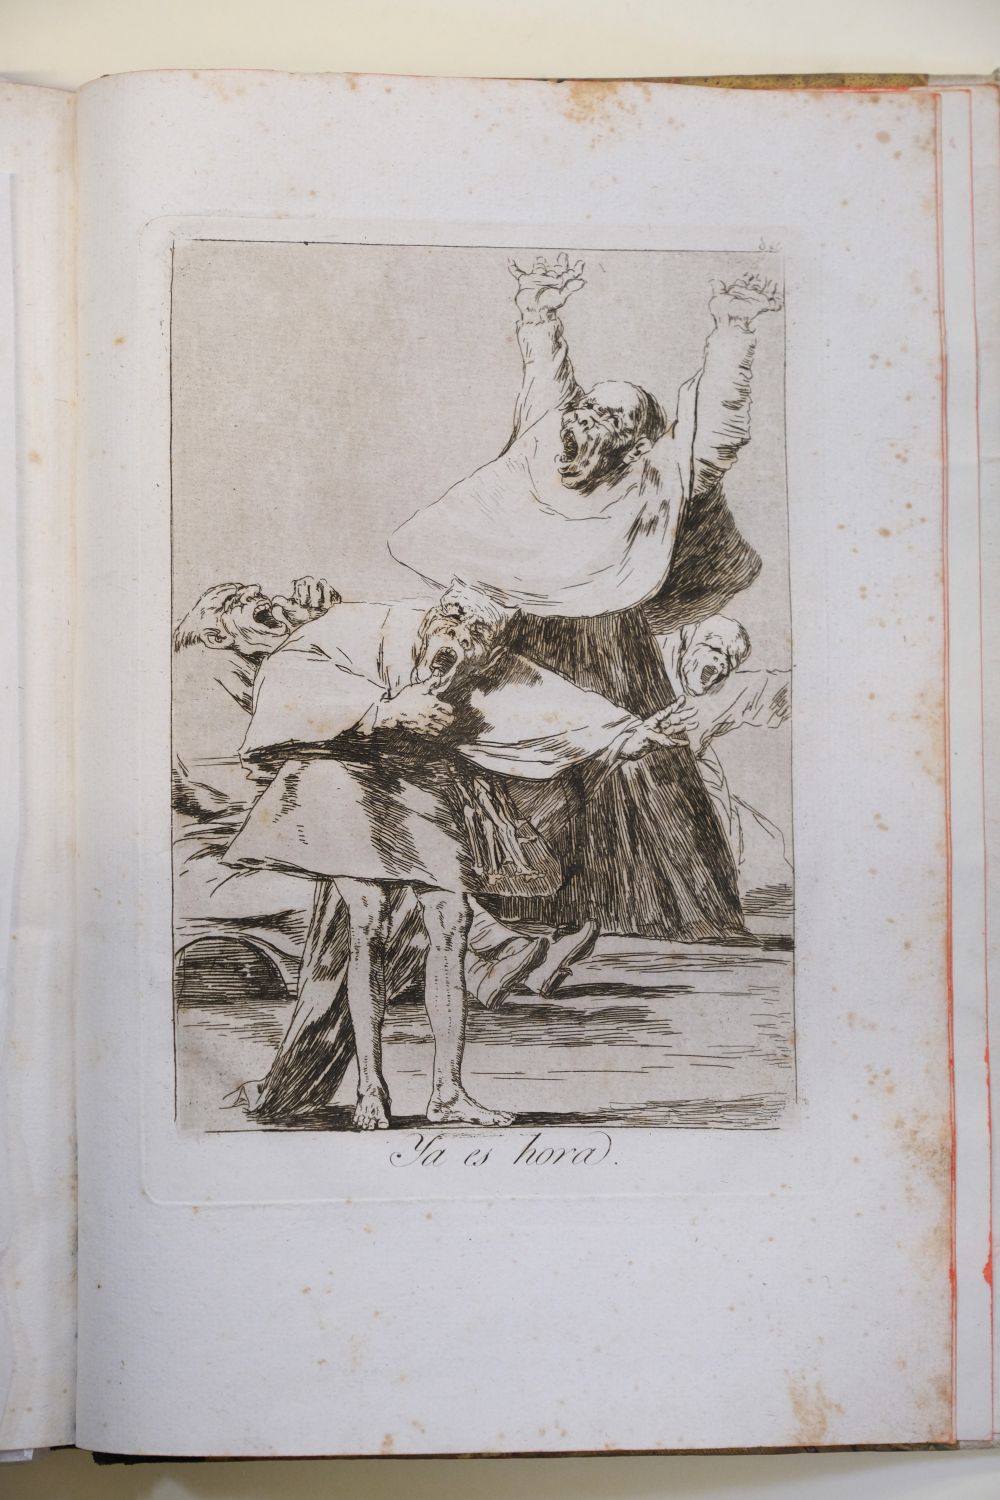 Goya (Francisco de, 1746-1828) Los Caprichos, 1799, the complete set of 80 etchings, FIRST EDITION - Image 34 of 37